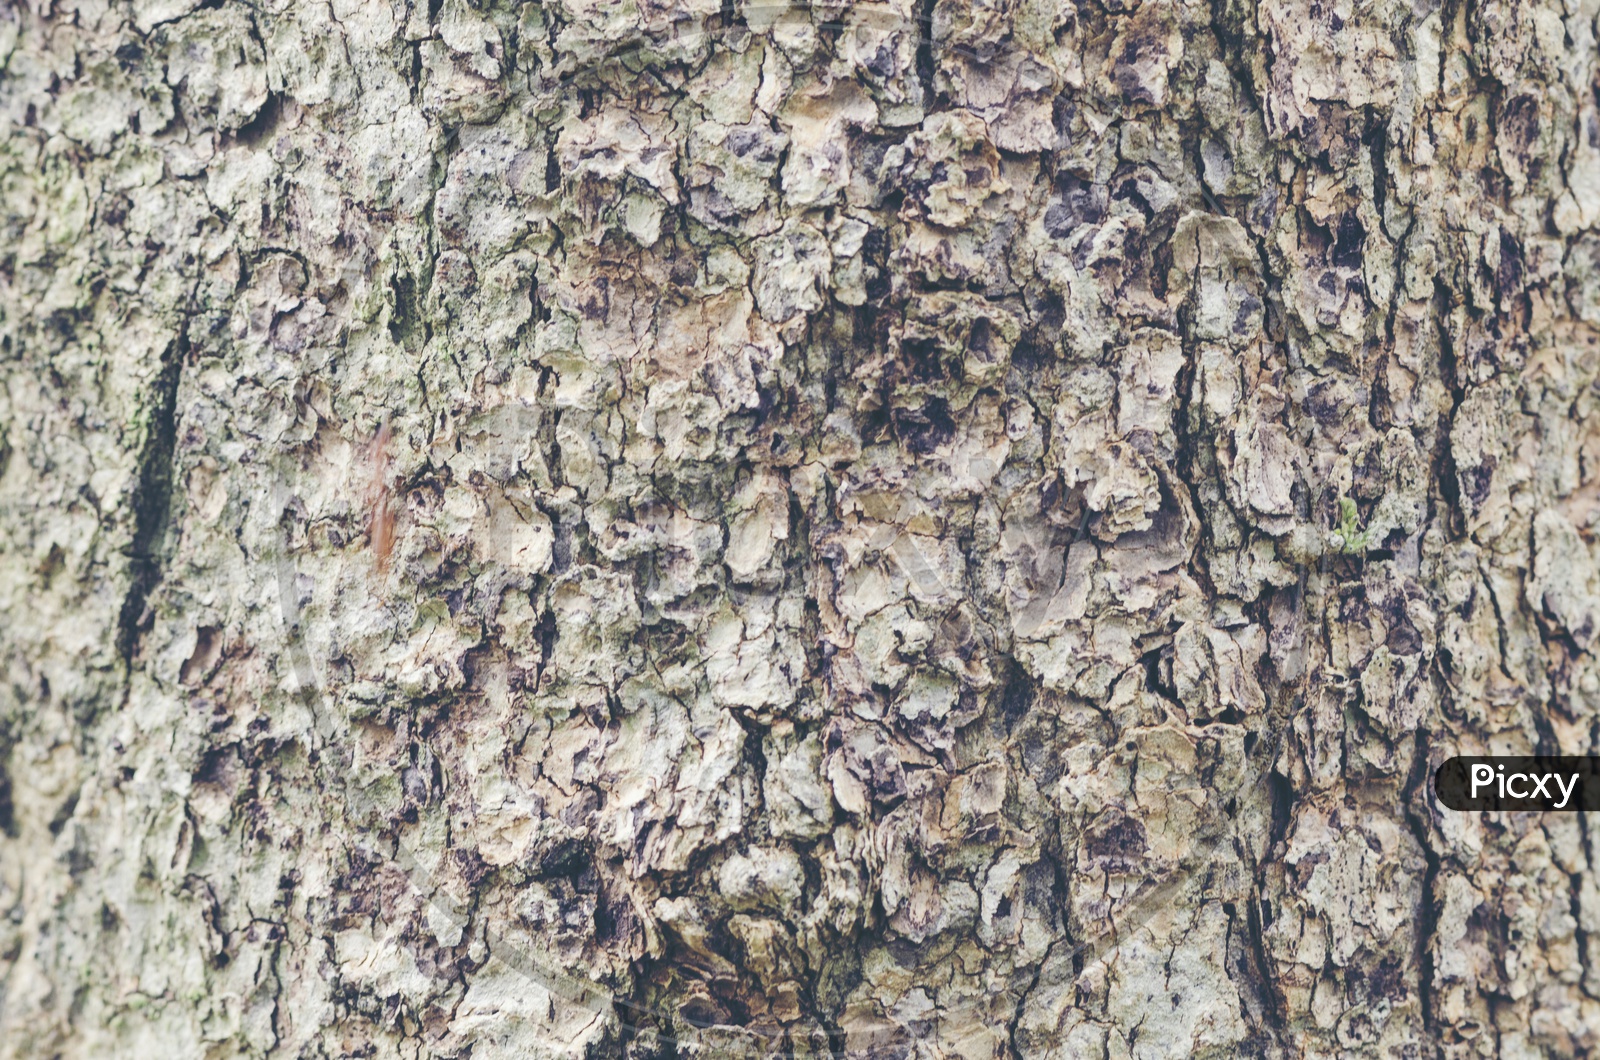 Detailed description of tree bark With texture